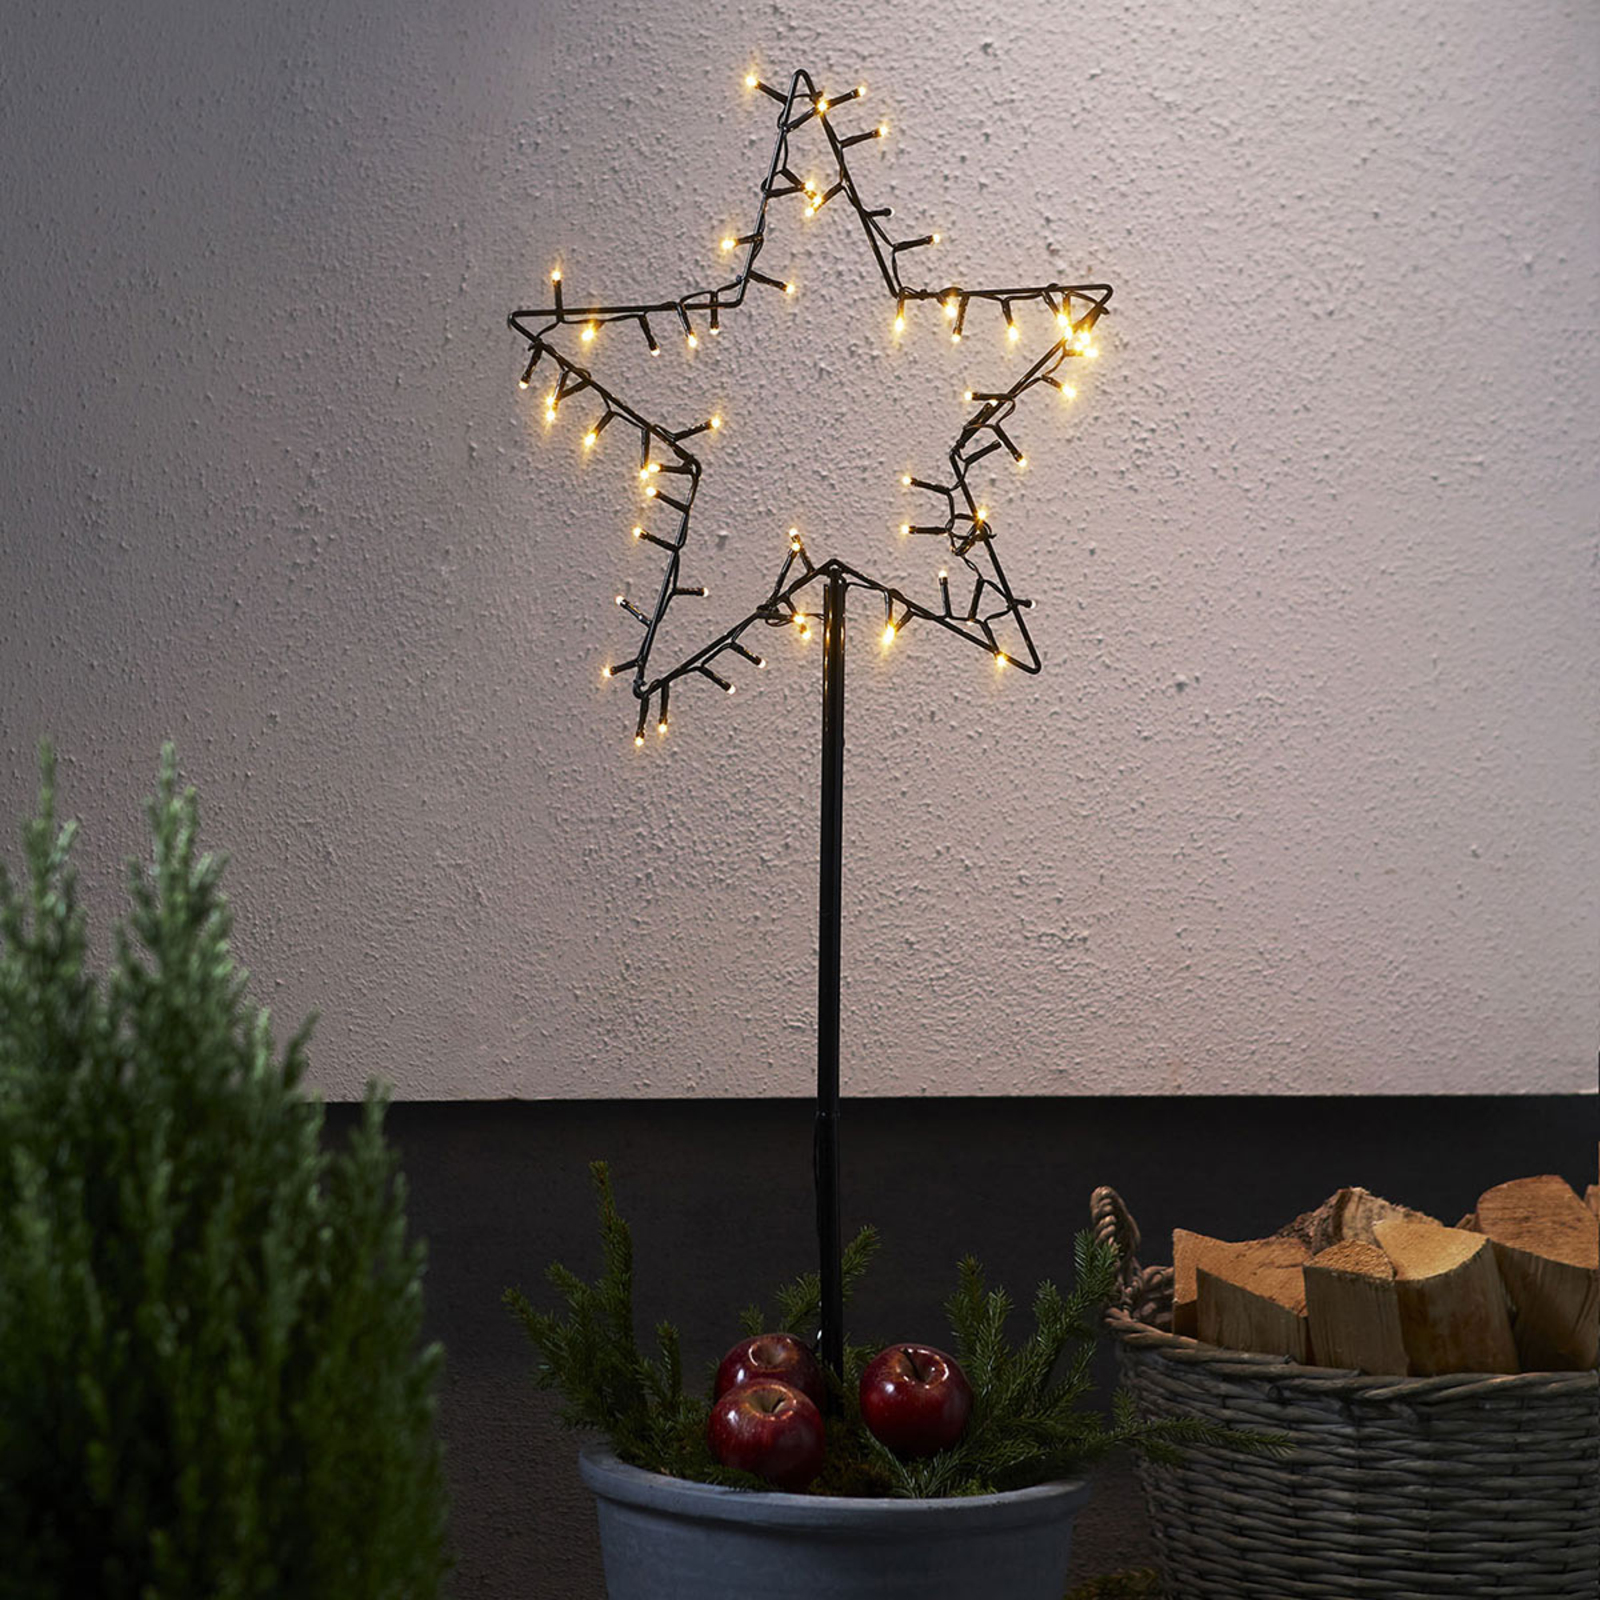 Spiky LED decorative star for outdoors, battery